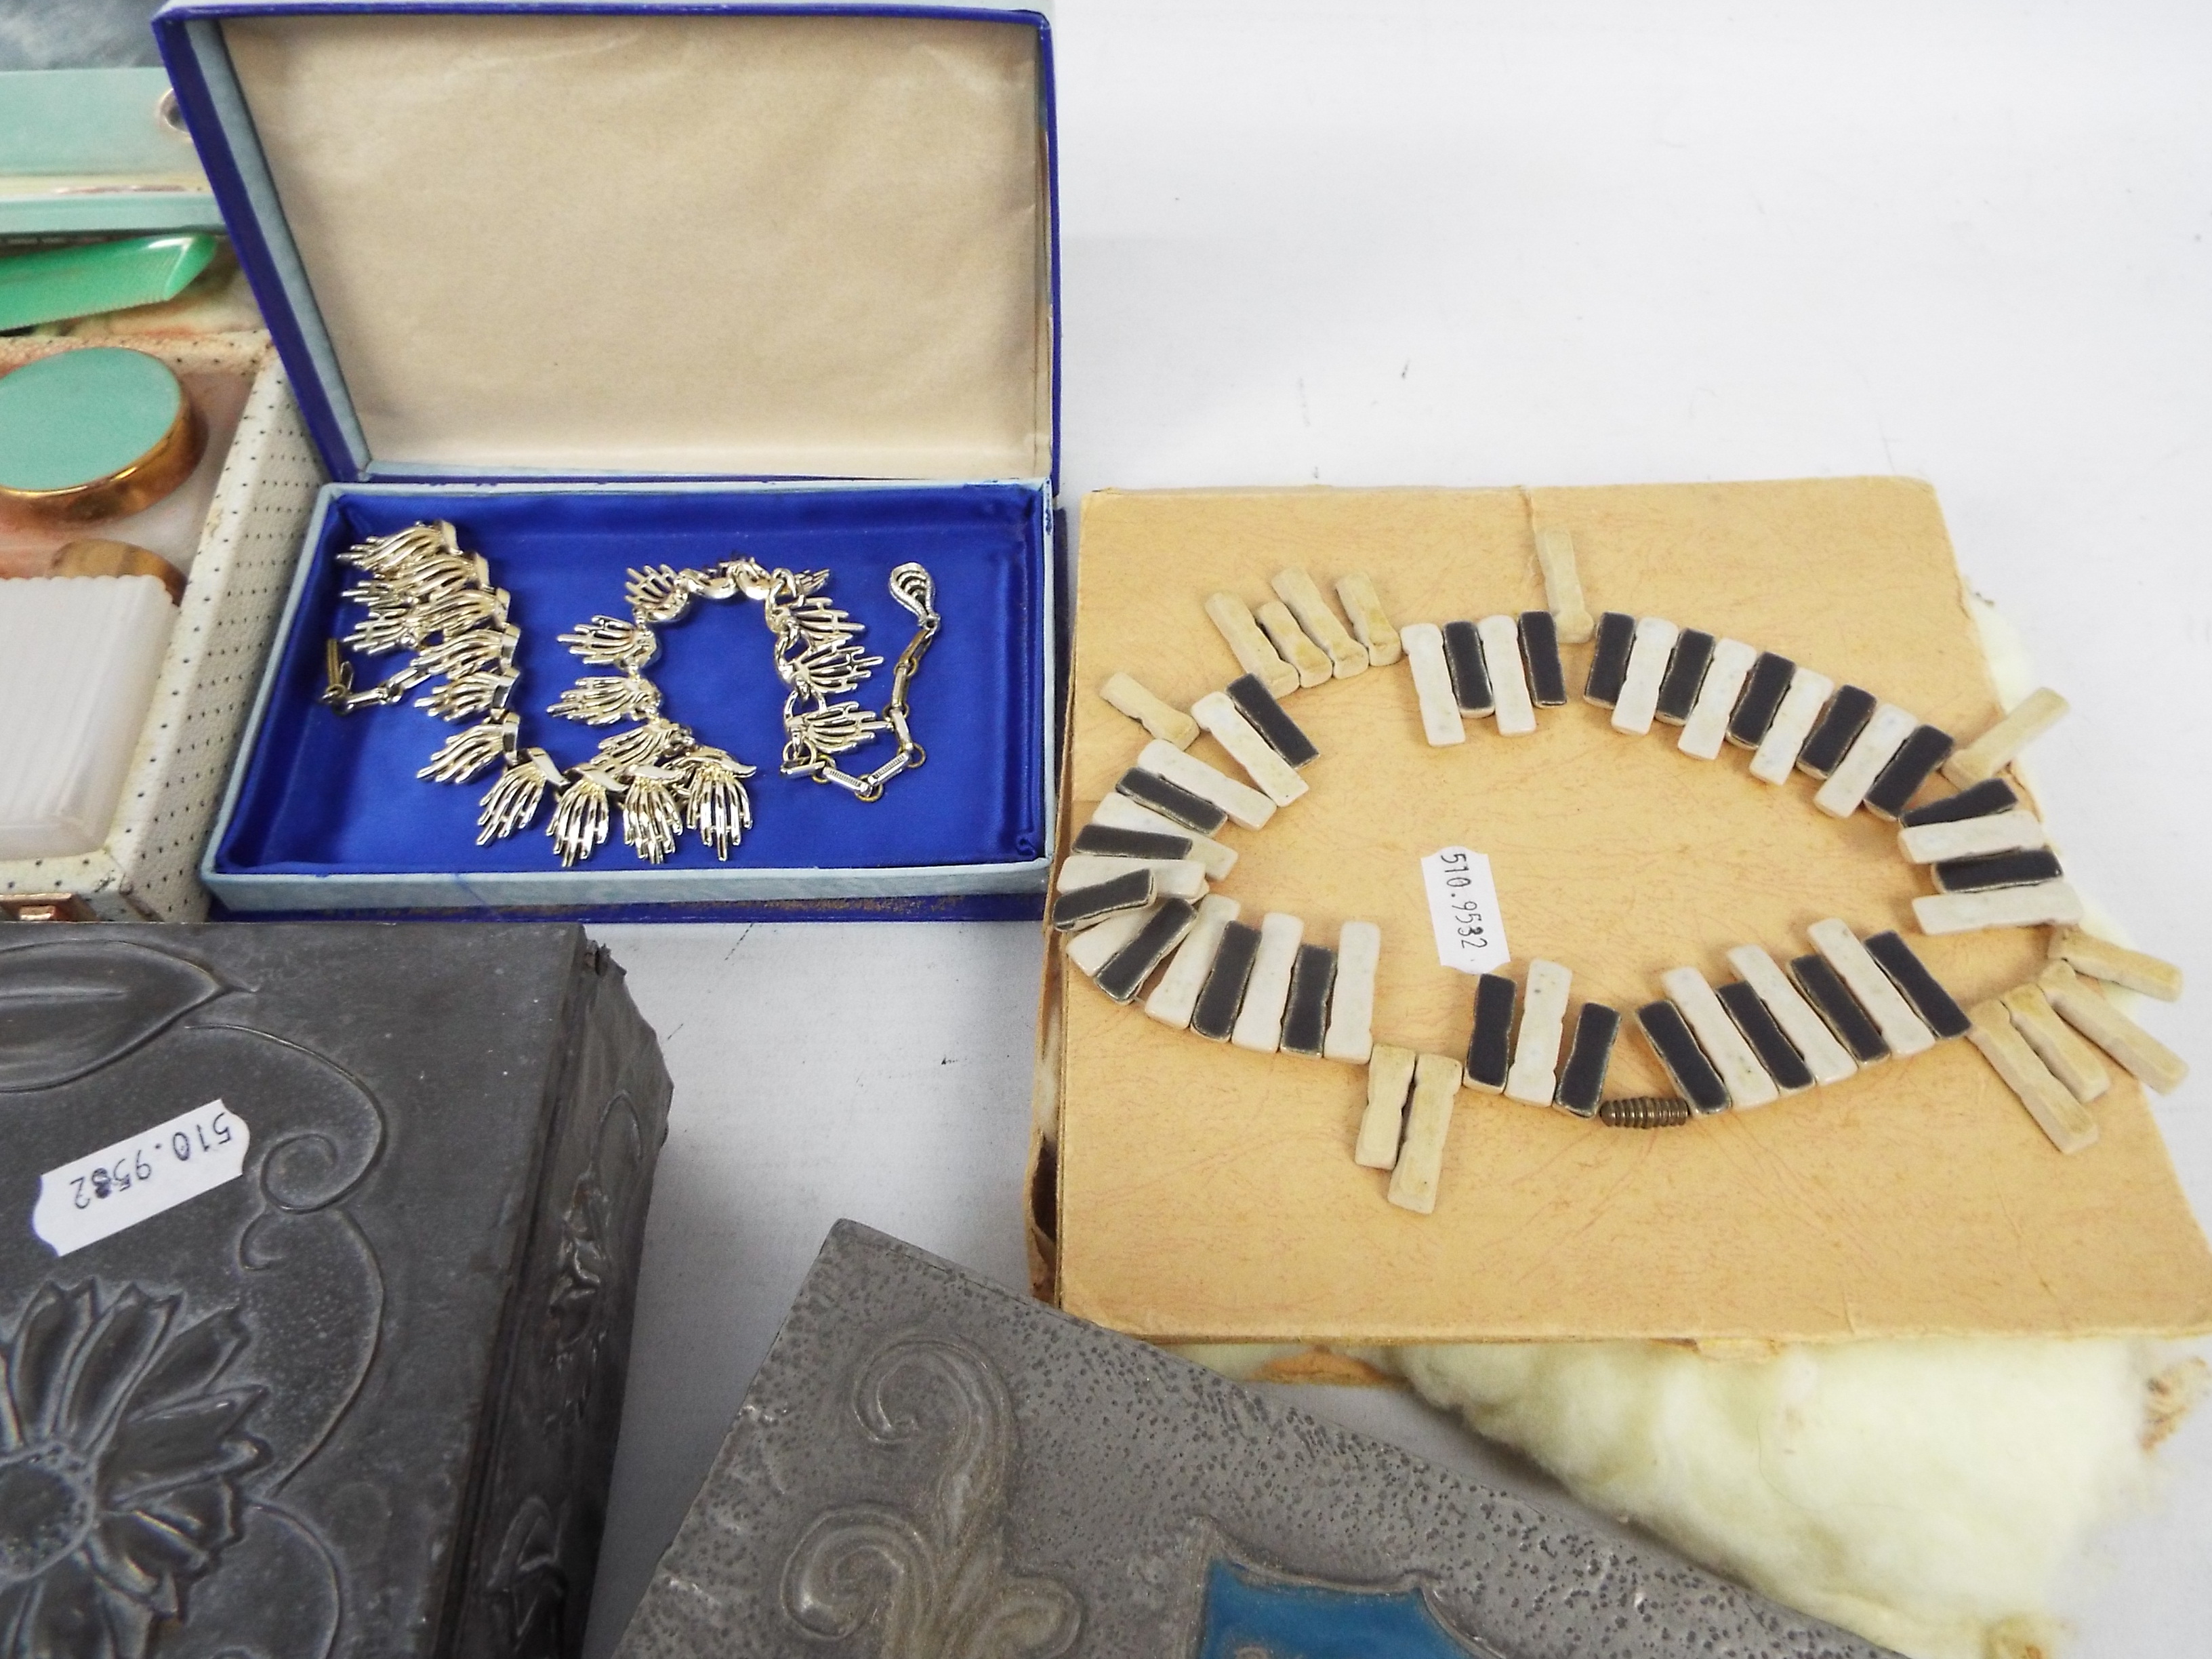 Lot to include jewellery / trinket boxes, costume jewellery, grooming / manicure sets and other. - Image 5 of 5